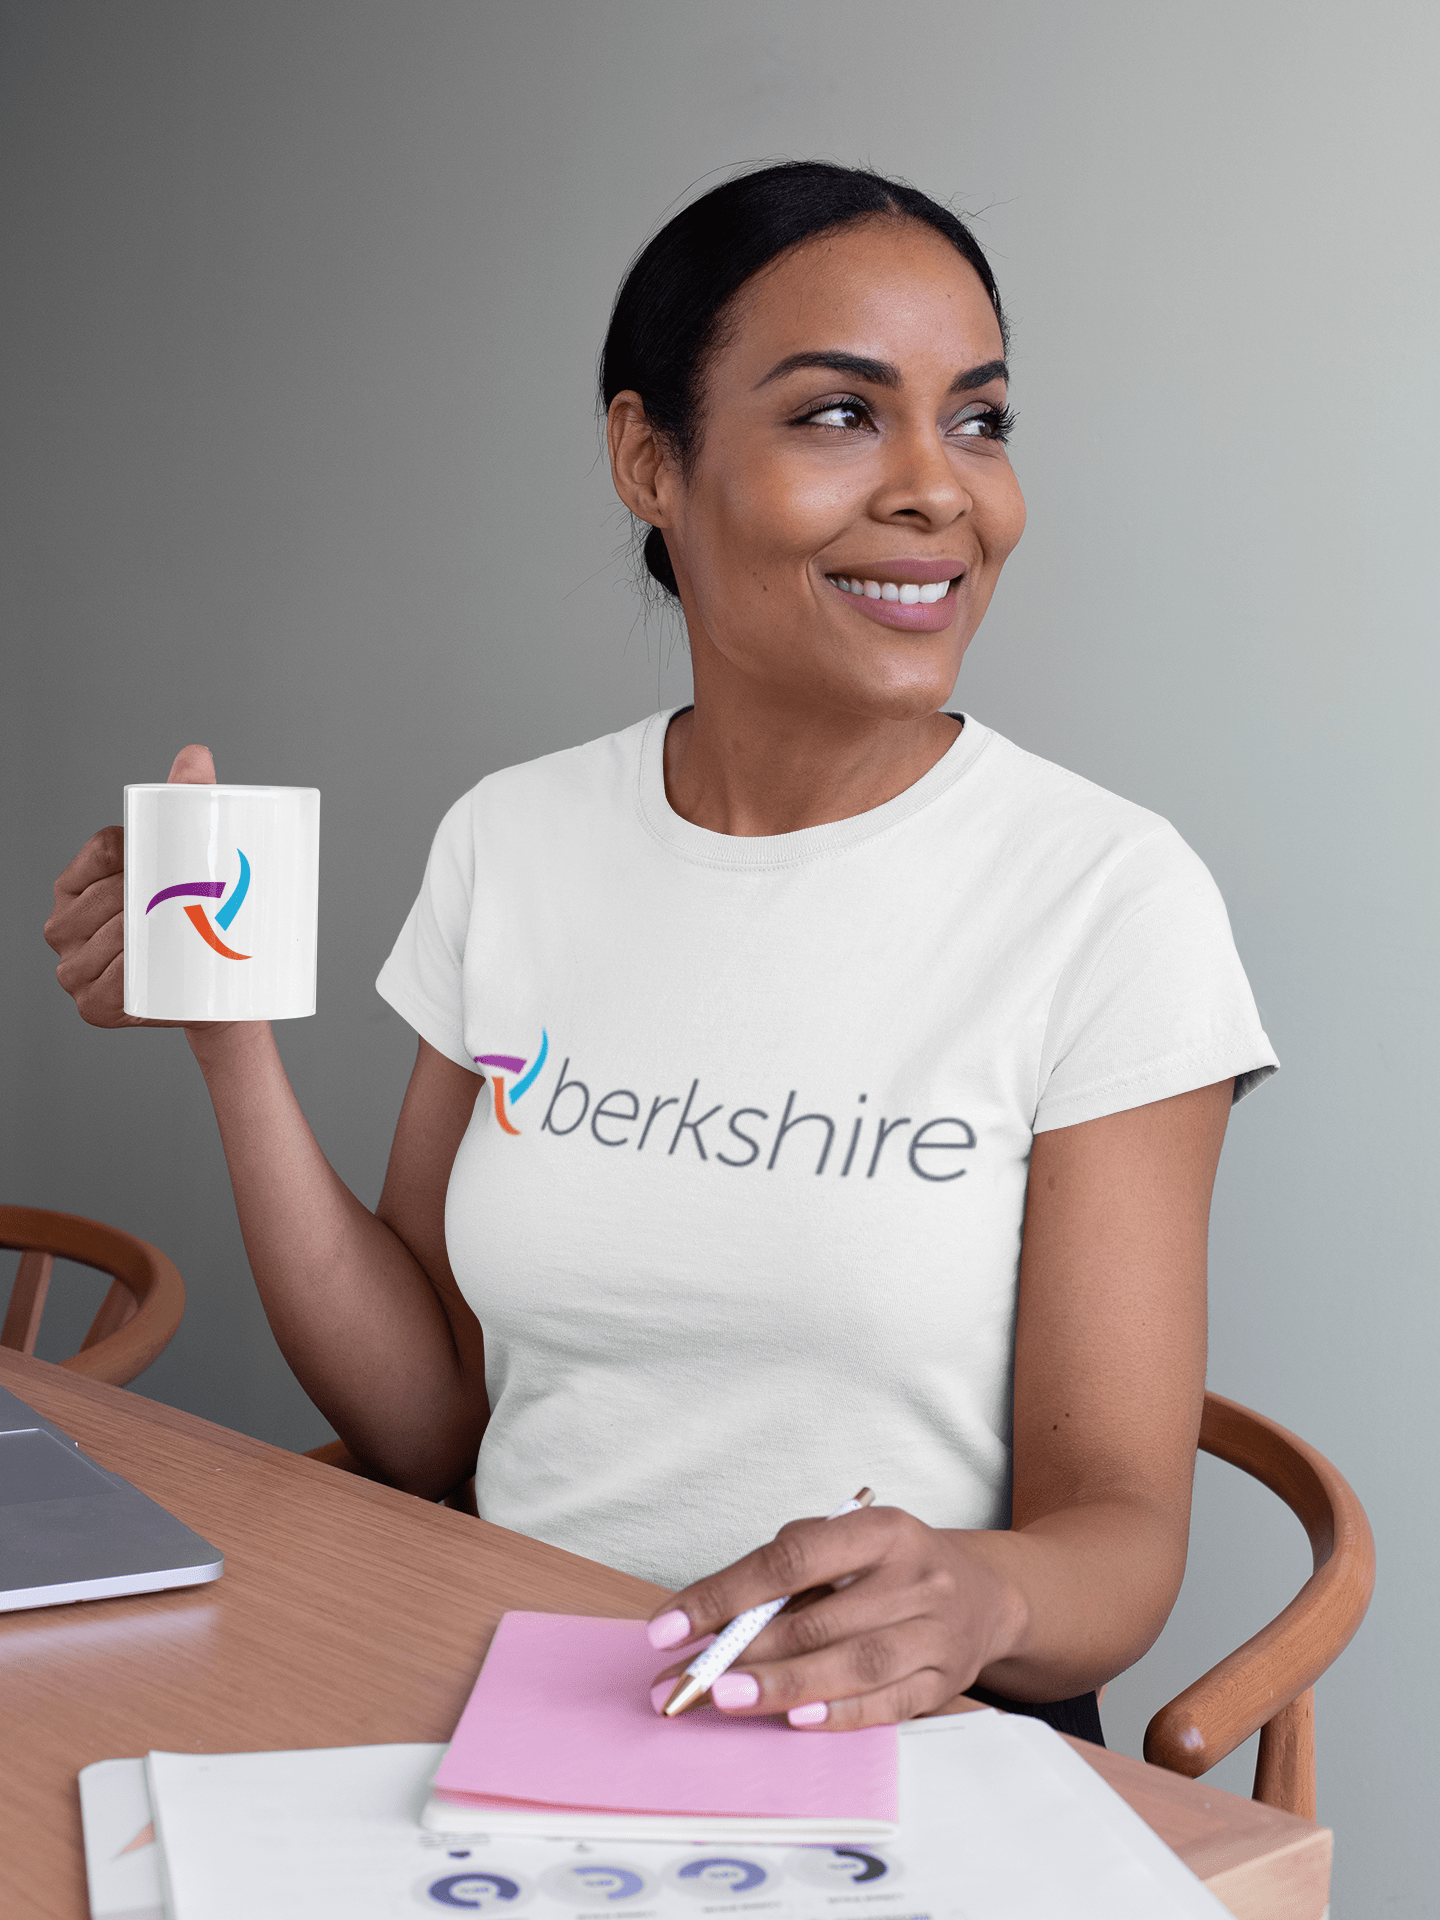 mockup-featuring-a-middle-aged-woman-wearing-a-t-shirt-and-holding-an-11-oz-mug-31699